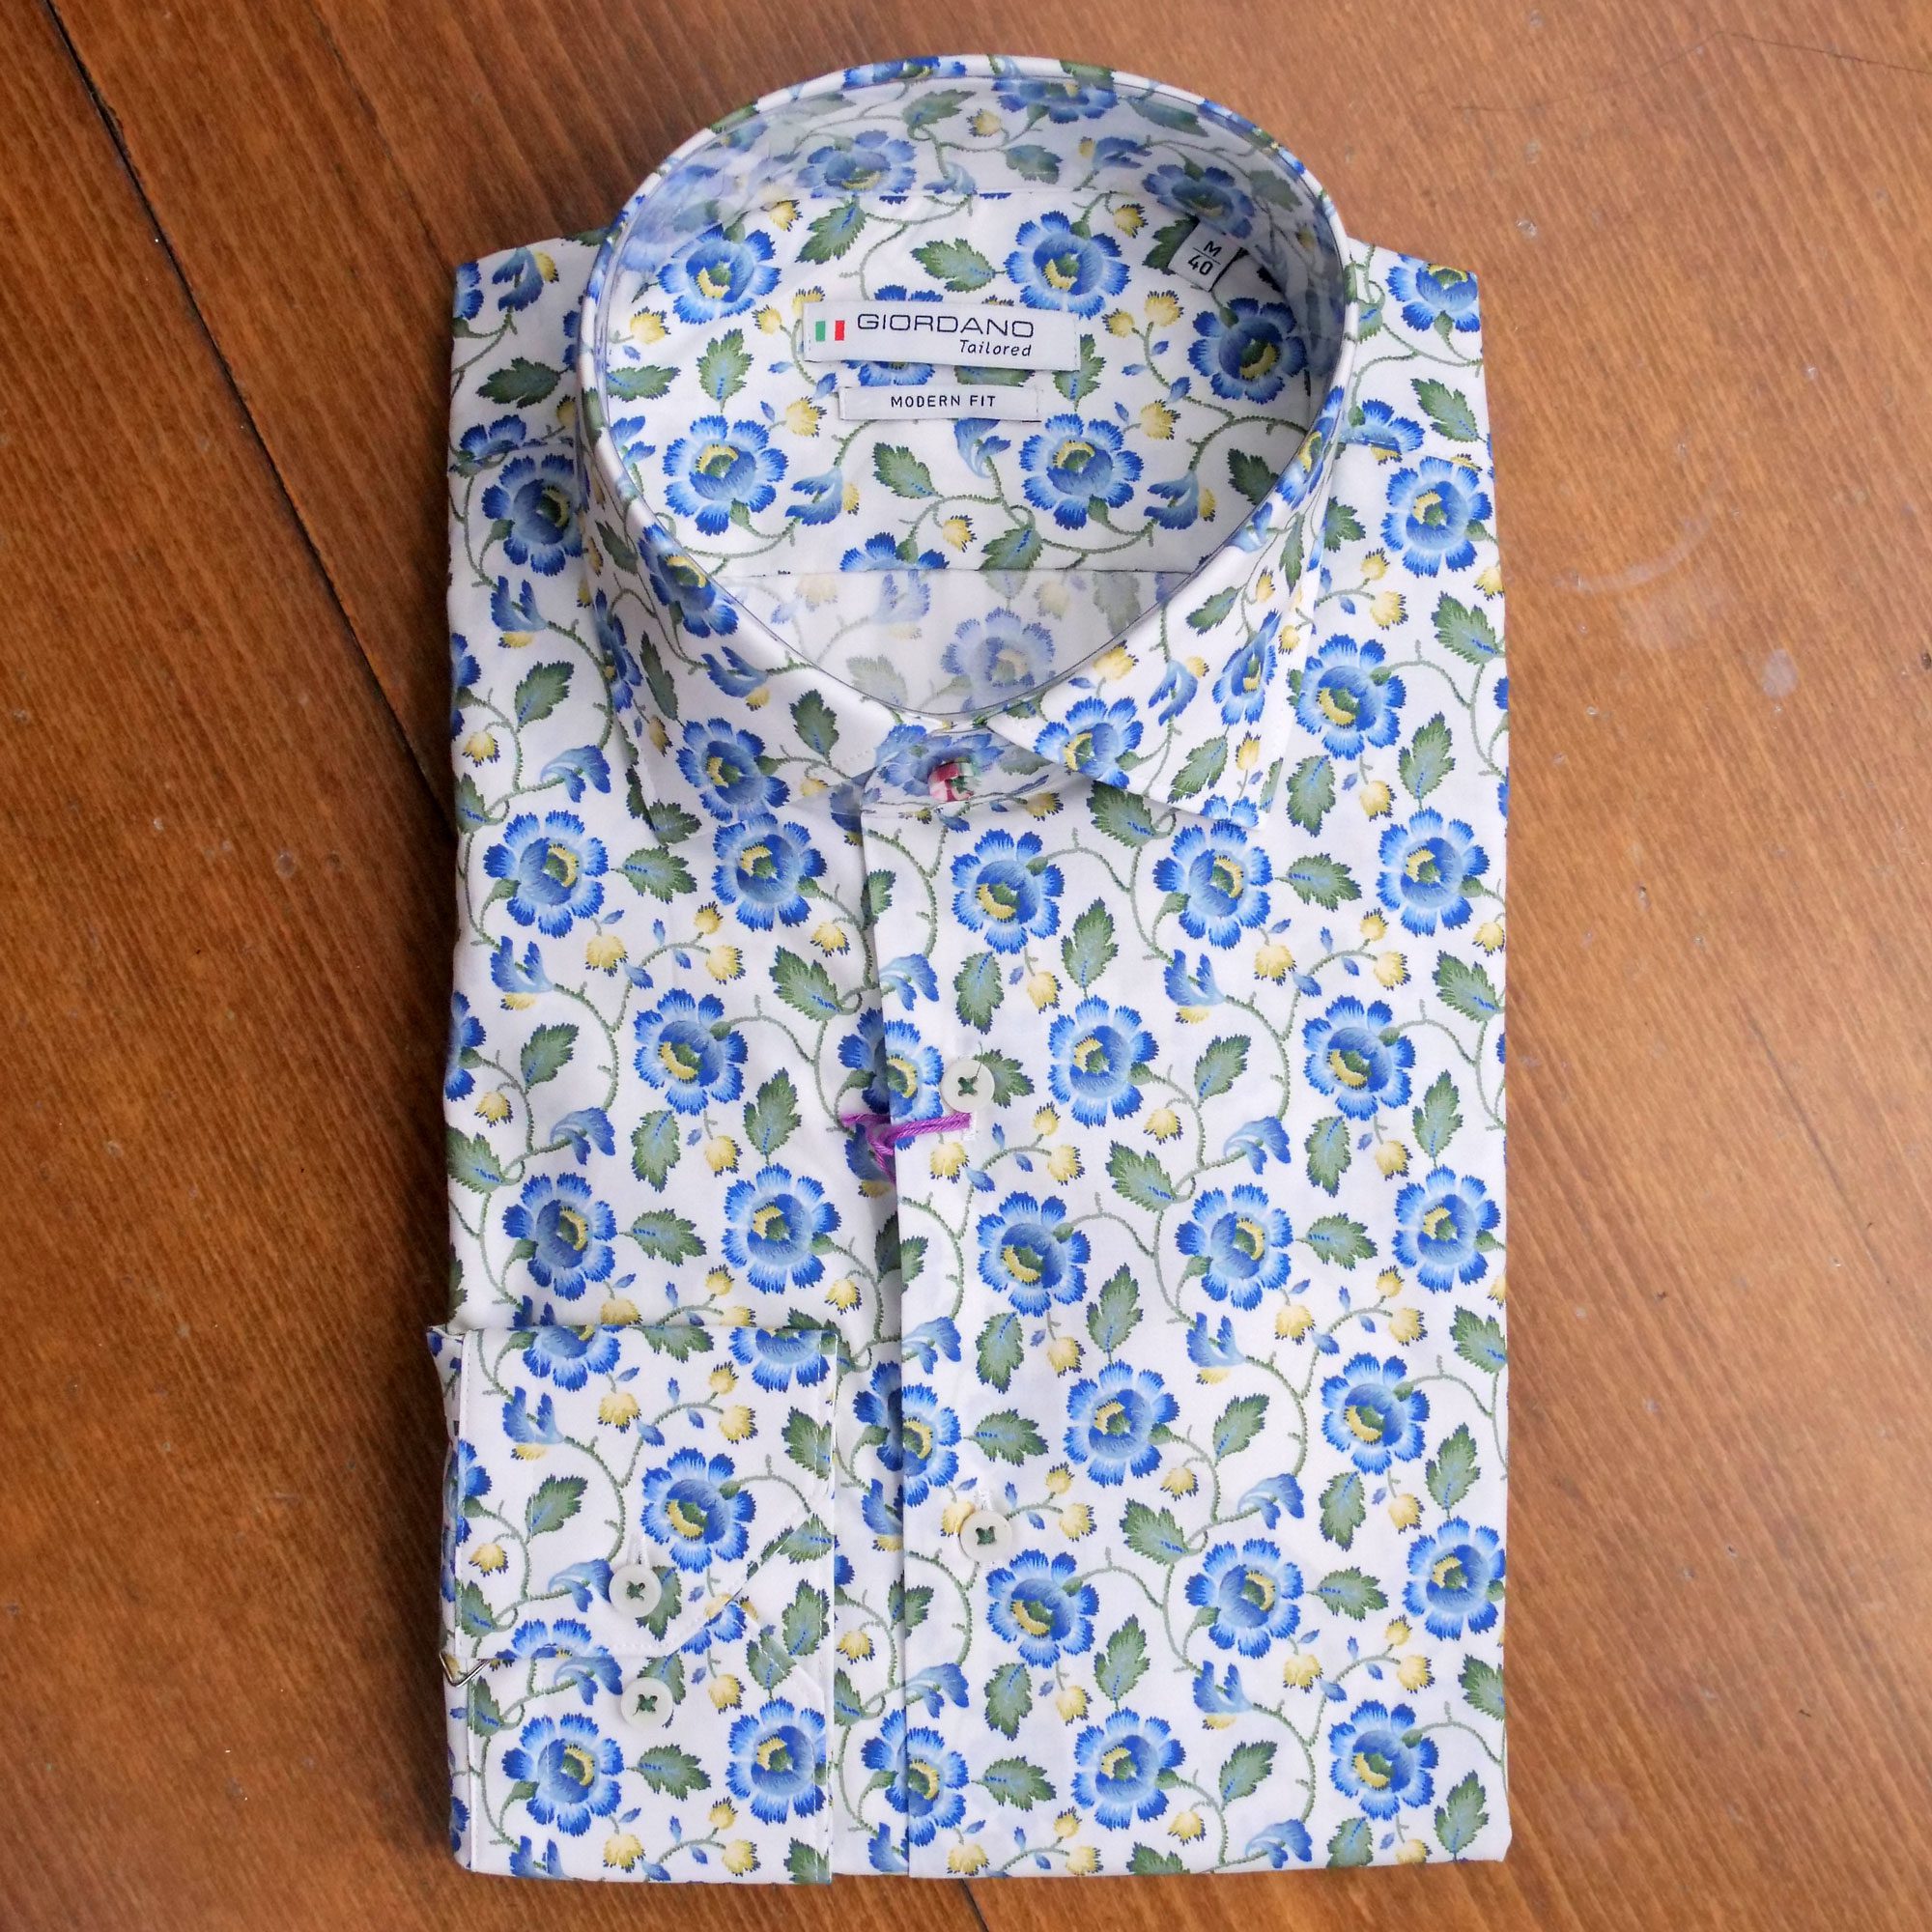 Giordano shirt with small blue flowers on white liberty fabric ...